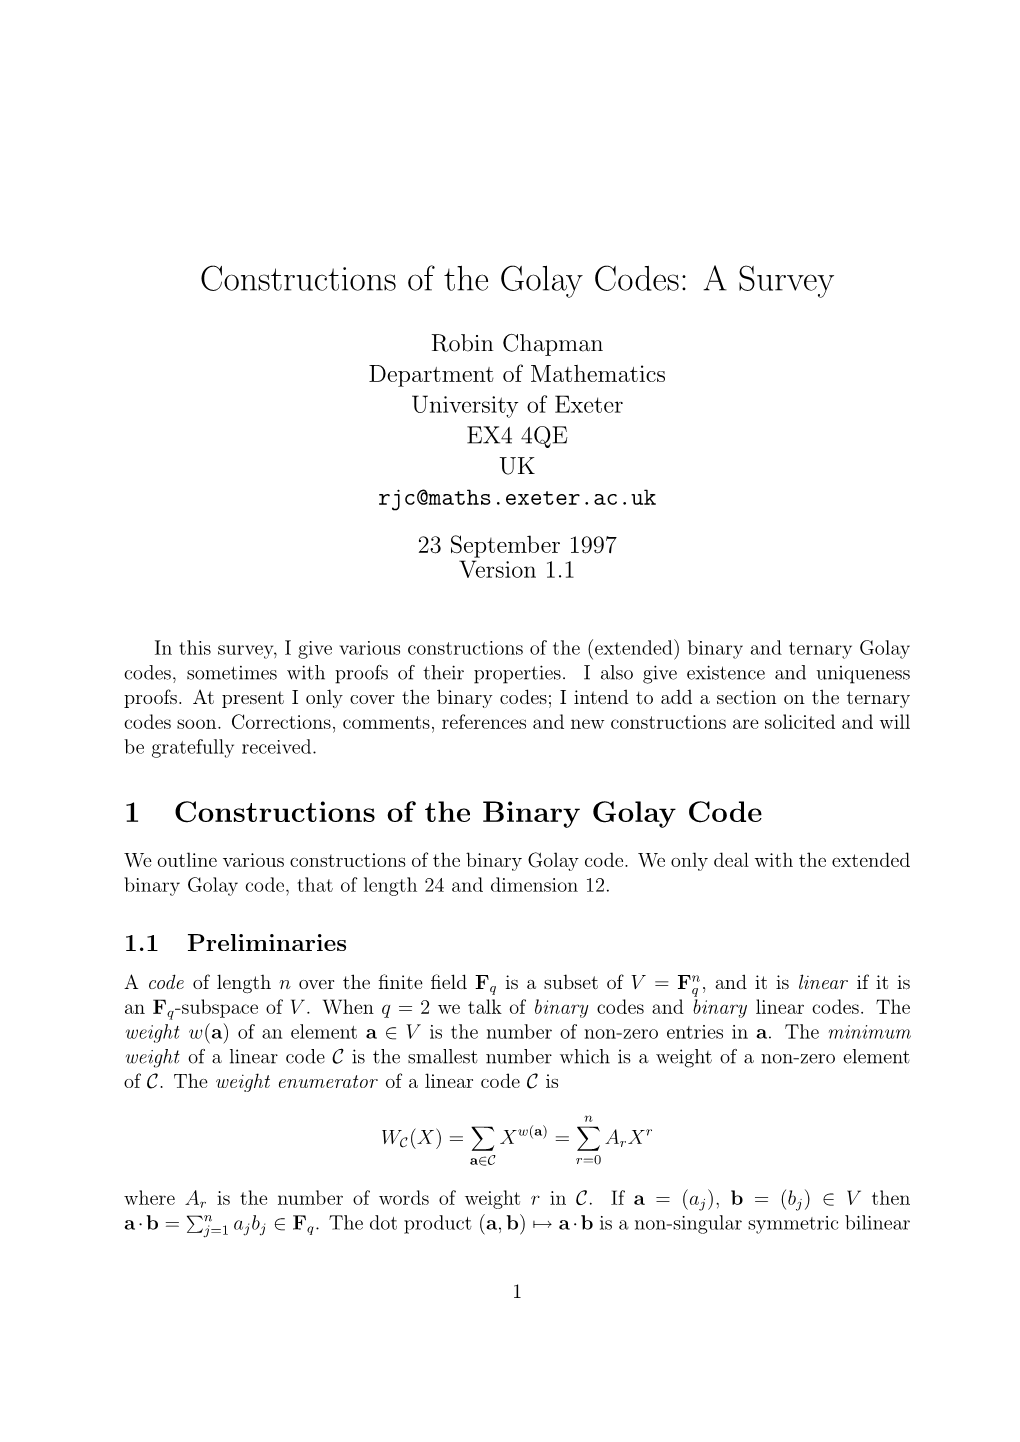 Constructions of the Golay Codes: a Survey